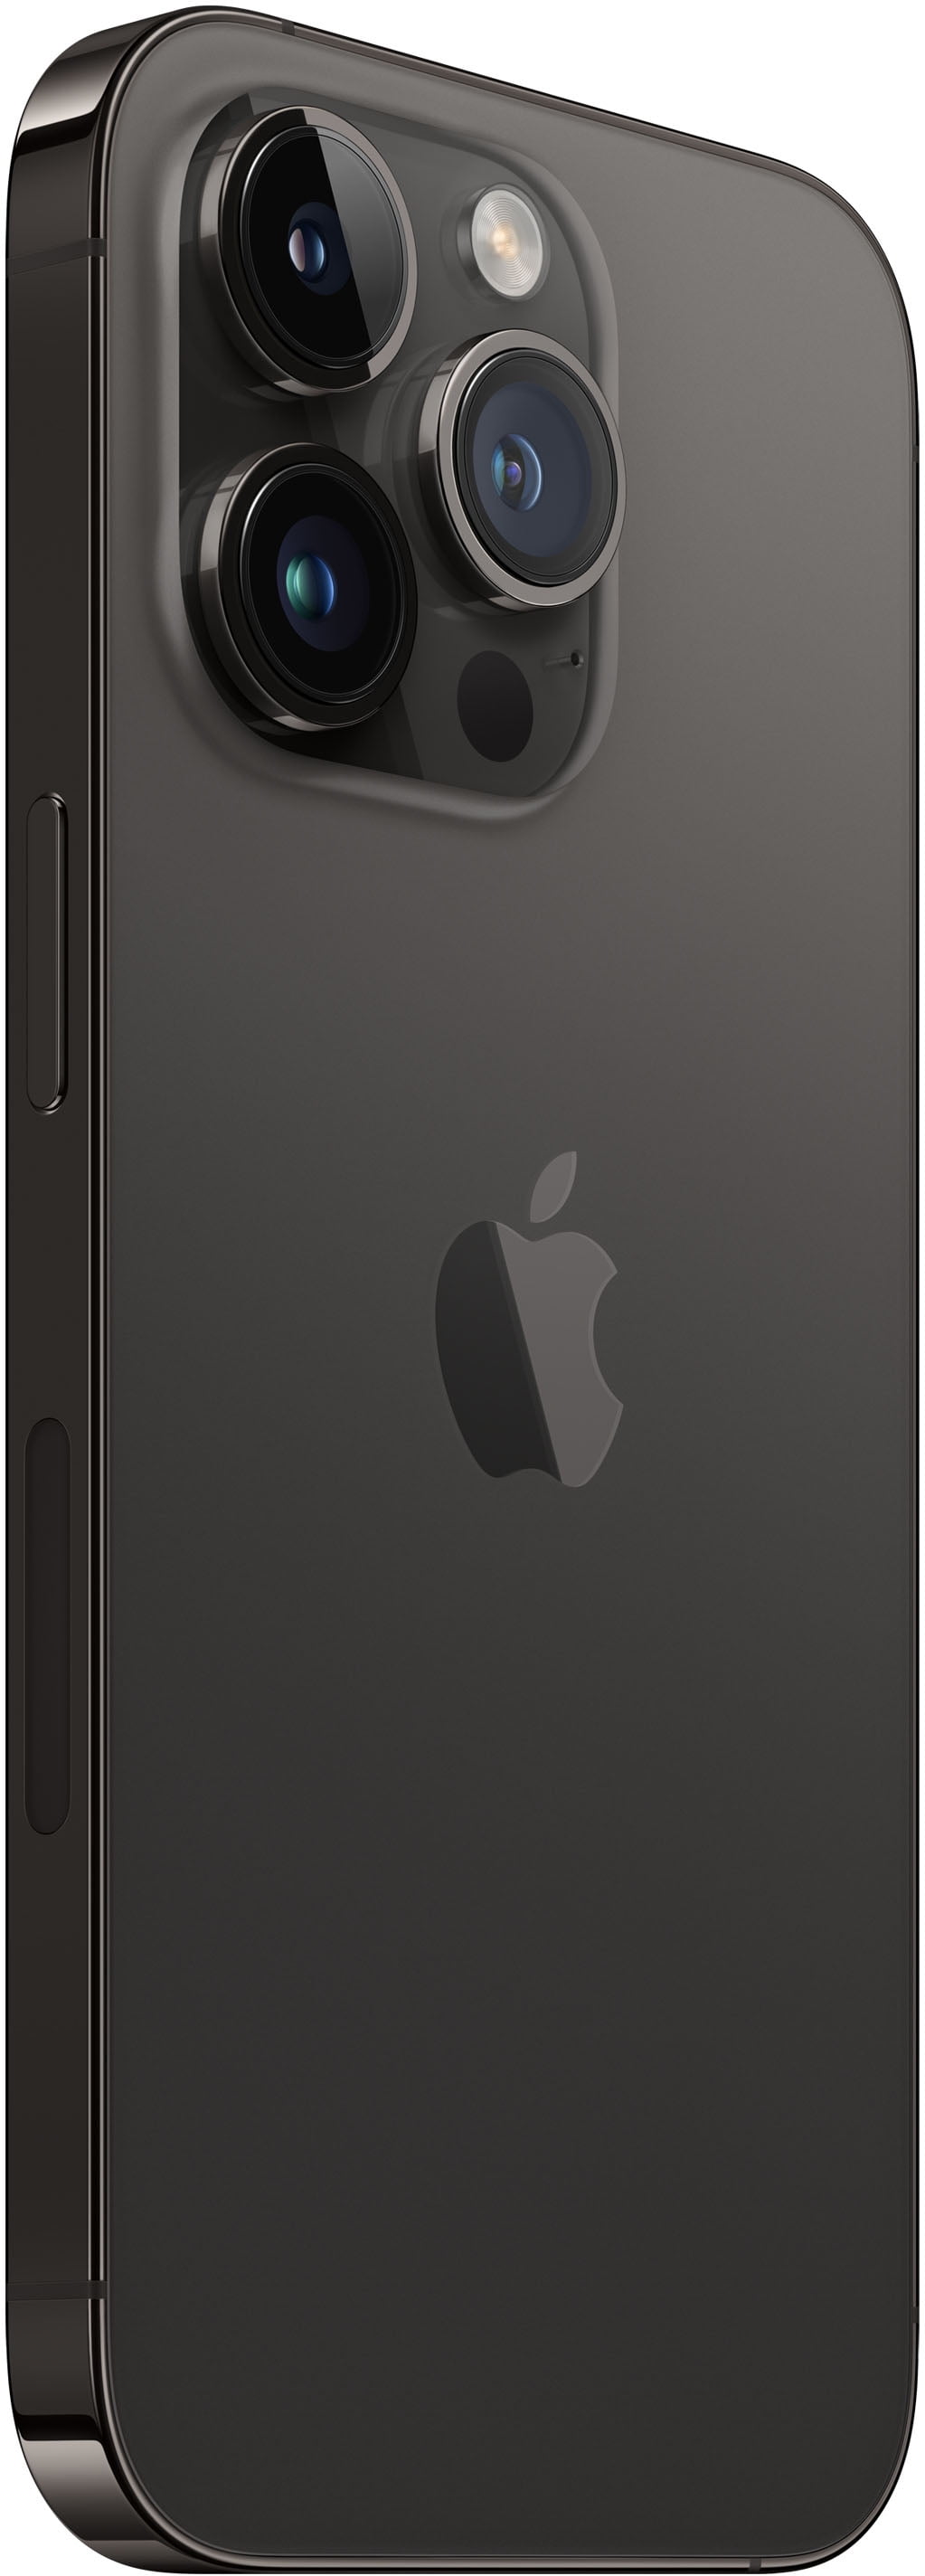 Restored Apple iPhone 14 Pro - Carrier Unlocked - 128GB Space Black -  MPXT3LL/A (Refurbished) 